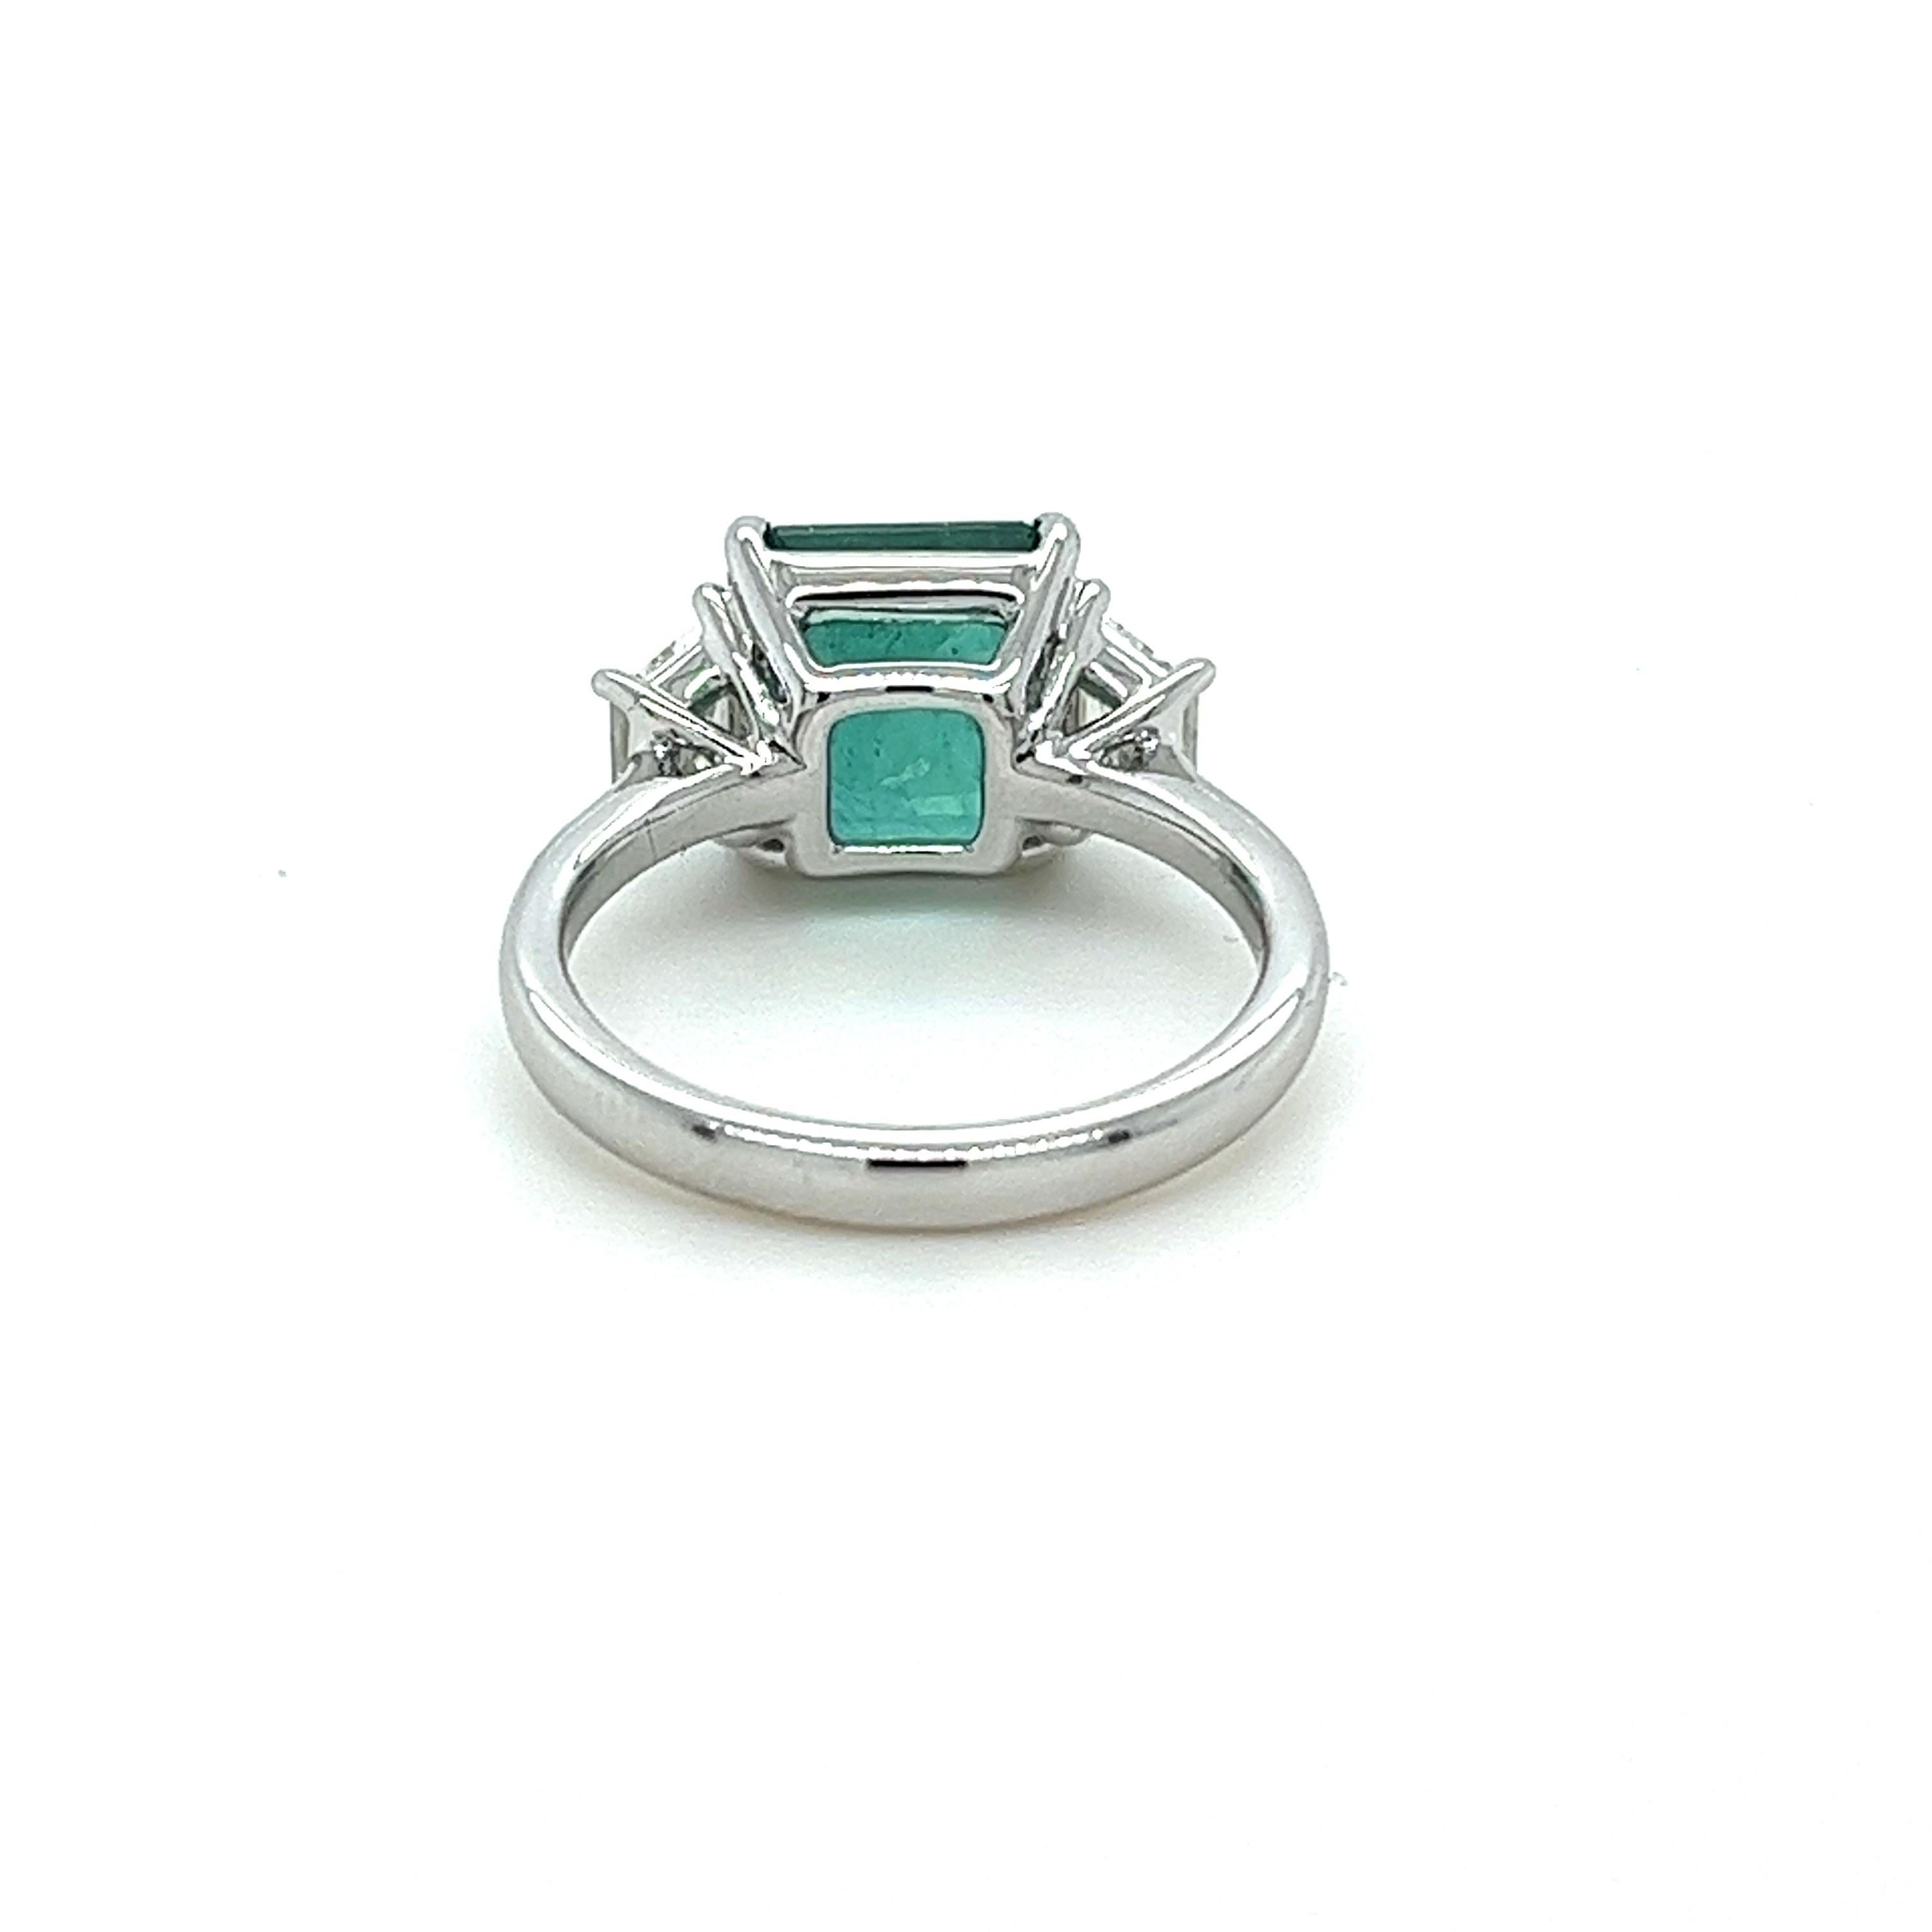 GIA Certified Emerald Cut Emerald & Diamond Ring in Platinum 3.66 Carats In New Condition For Sale In Great Neck, NY